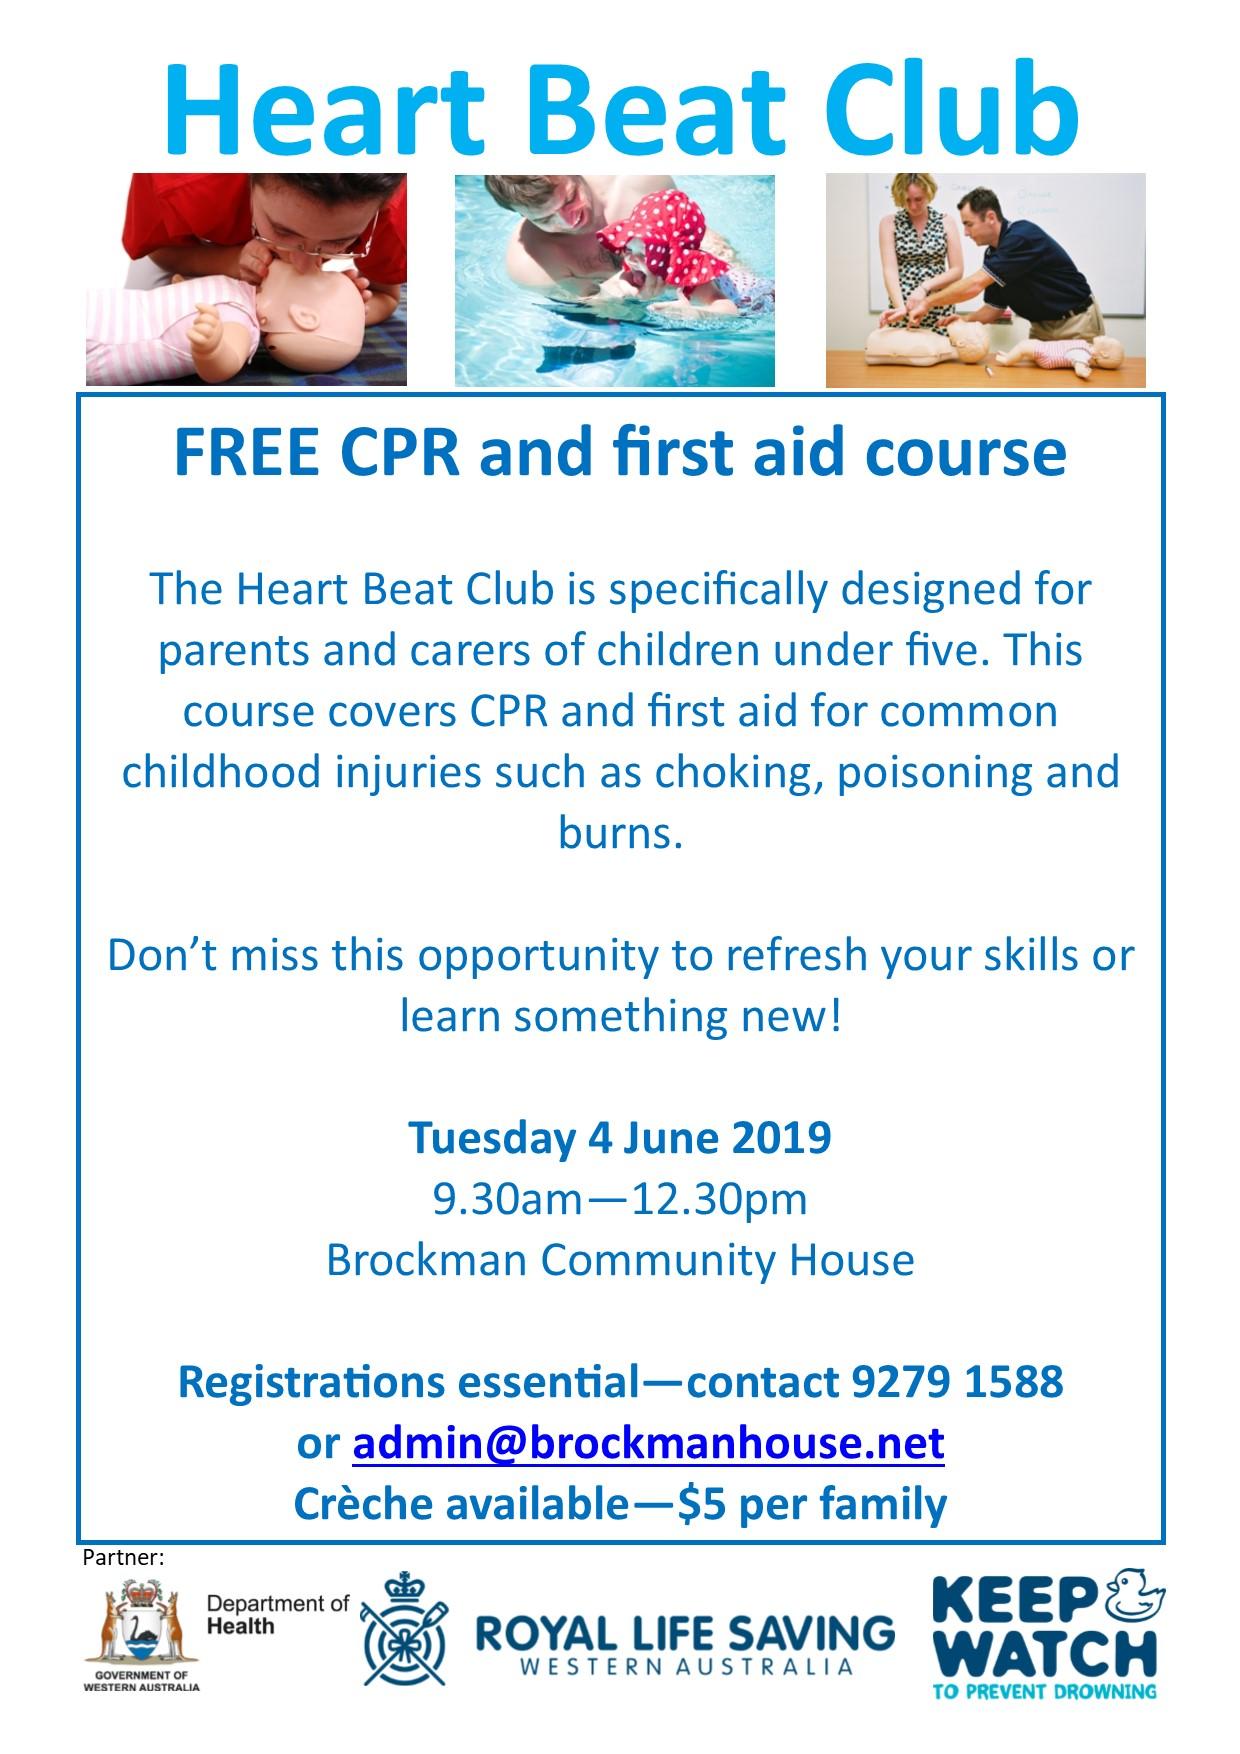 Heart Beat Club Free First Aid & CPR for Parents 